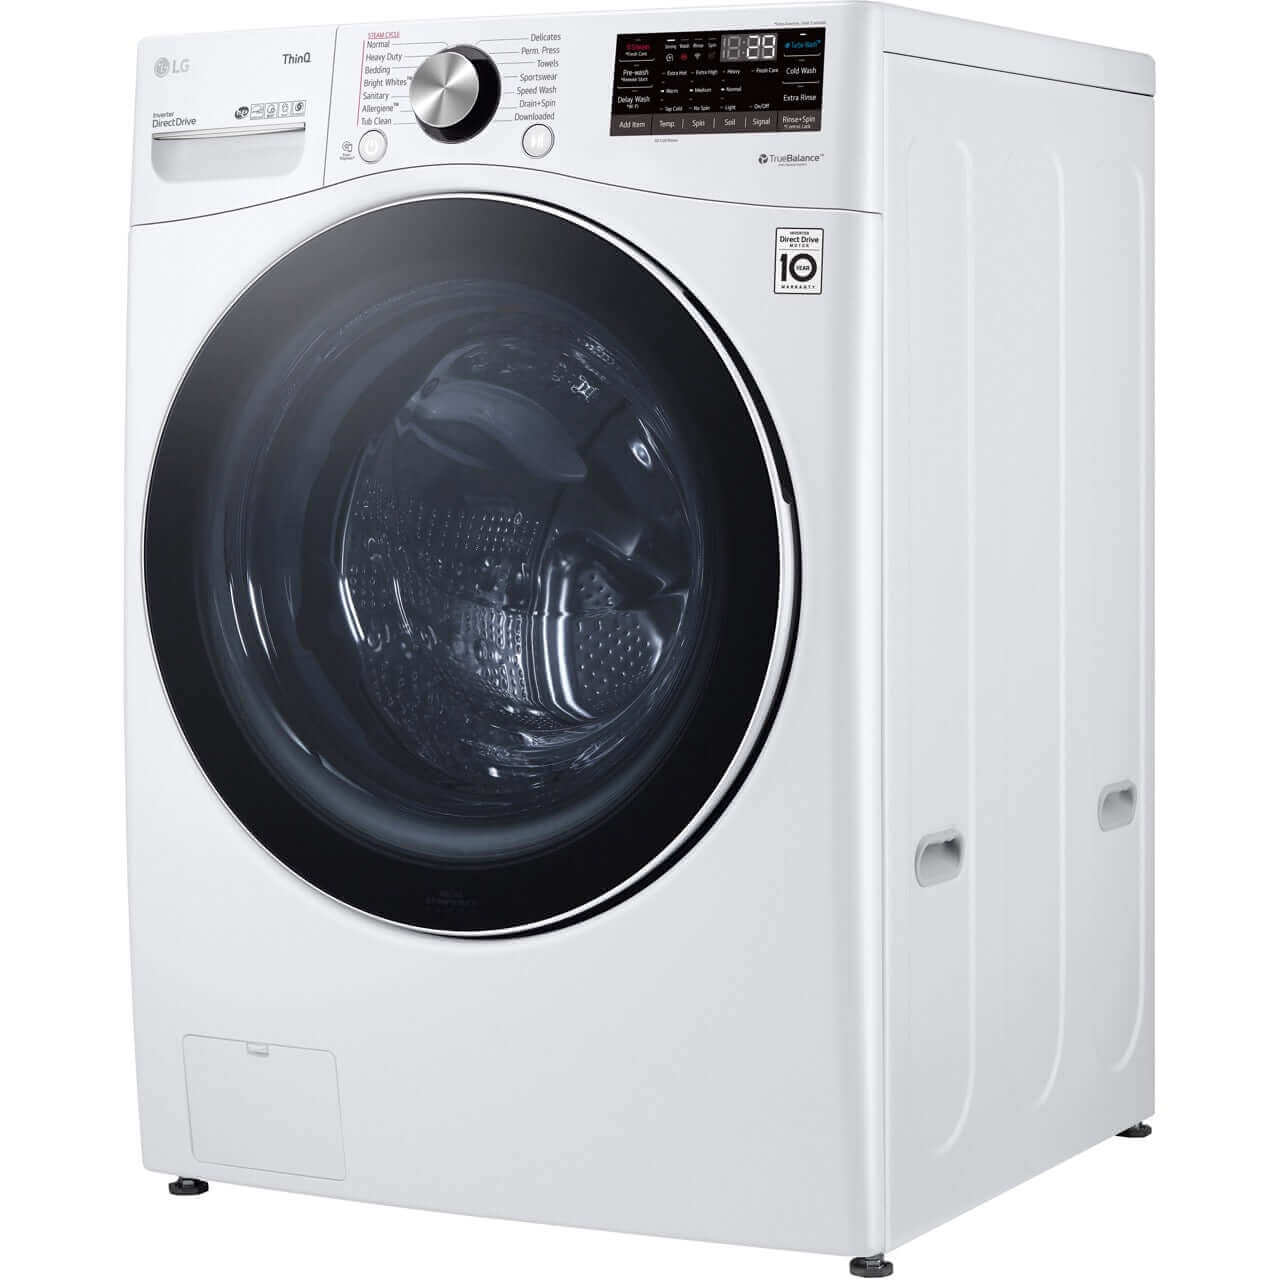 LG 27 In. 5.0-Cu. Ft. Front Load Washer with Built-In Intelligence in White (WM4200HWA)